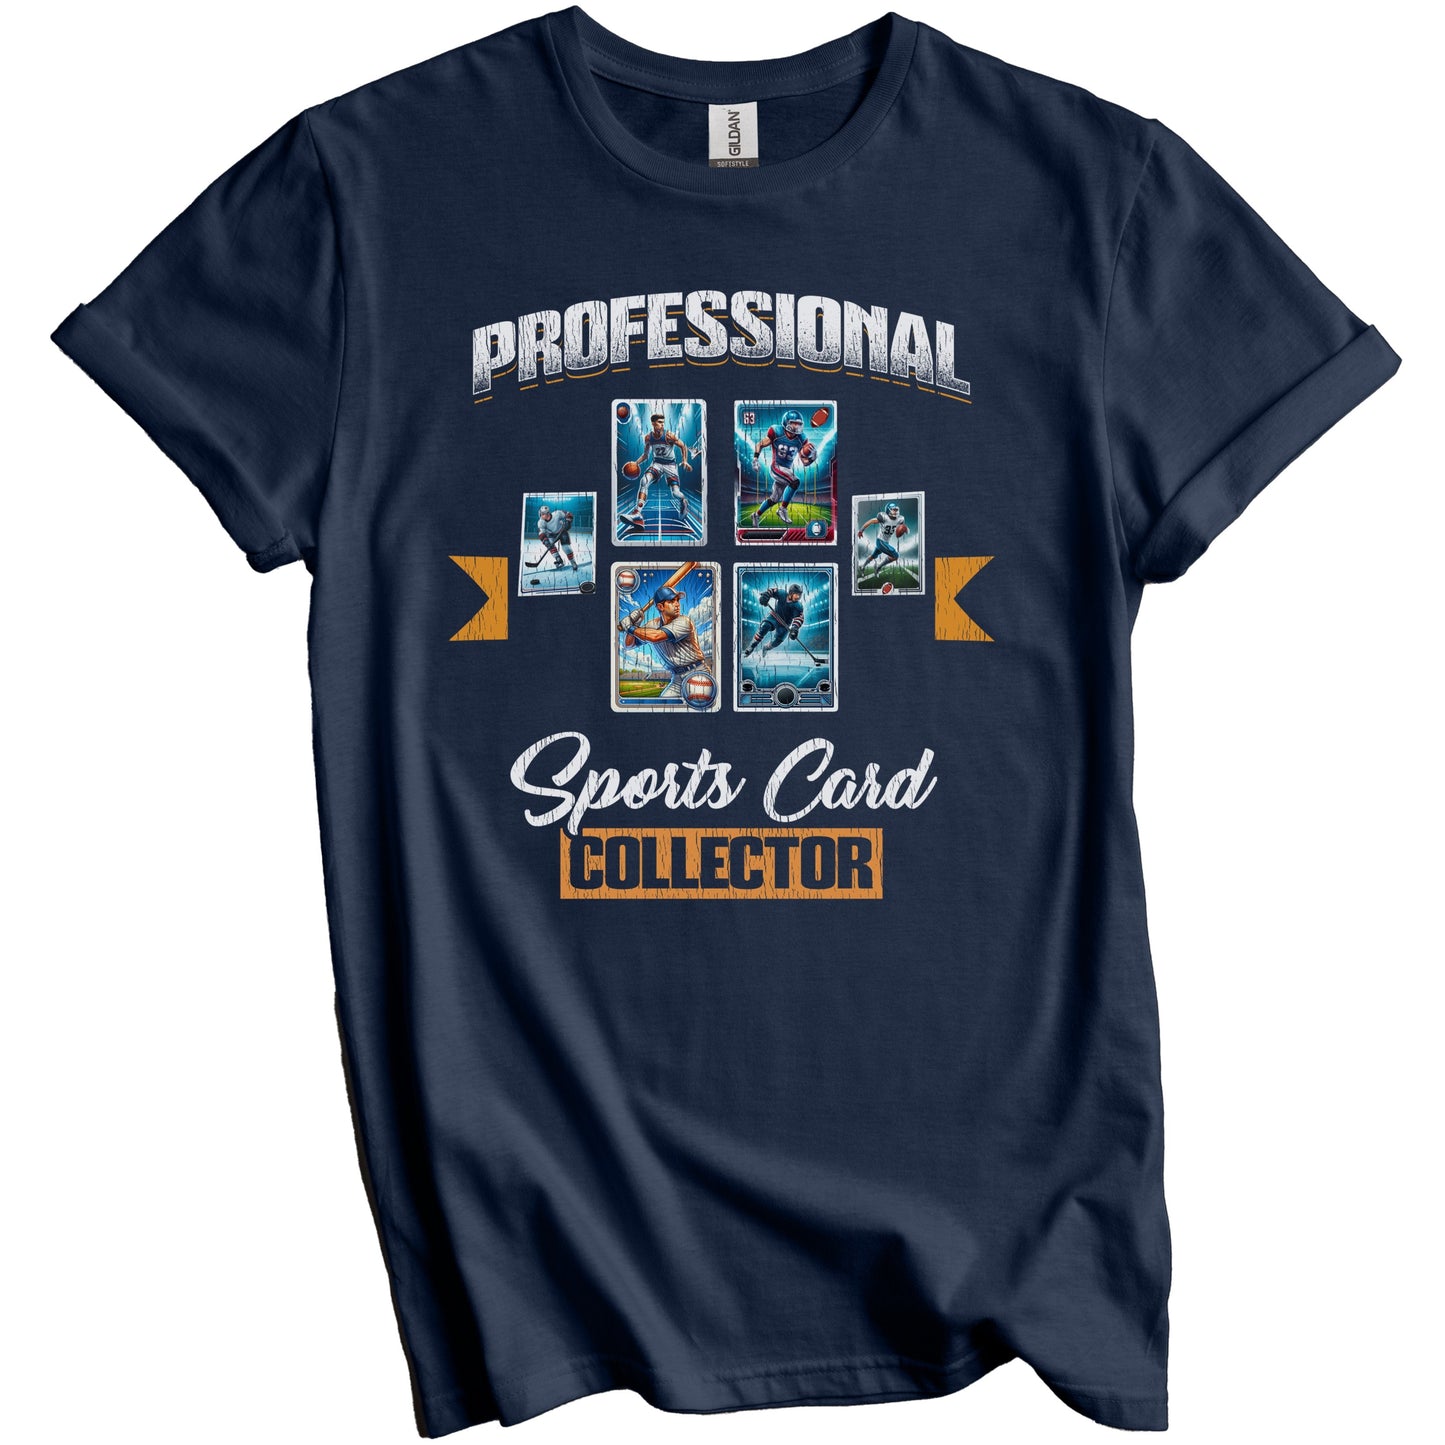 Professional Sports Card Collector Funny Sports Cards T-Shirt